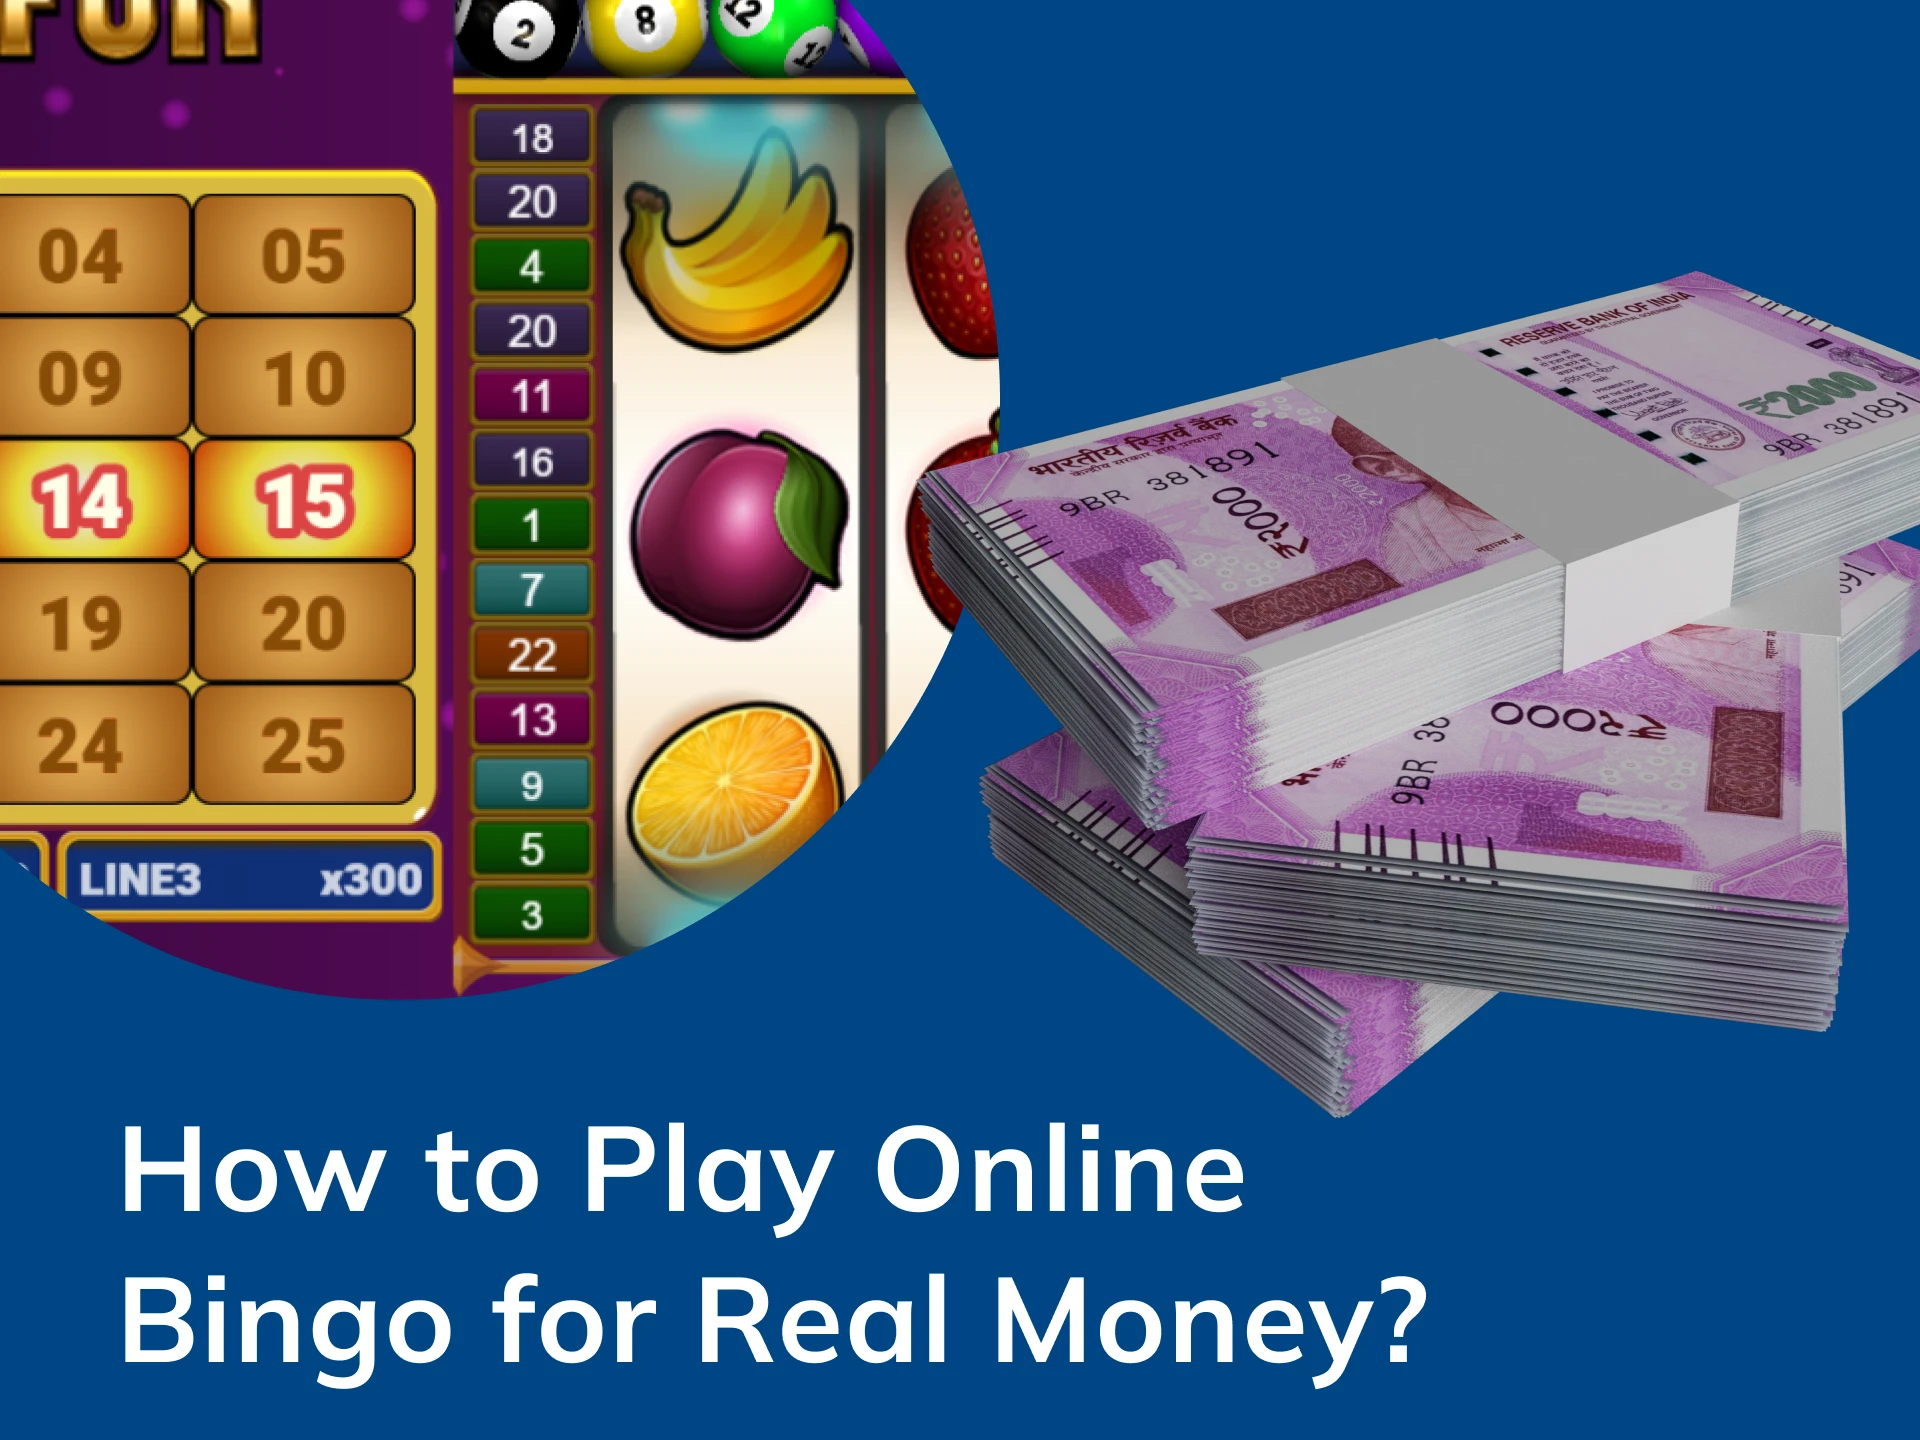 Play bingo for real money by following these steps.